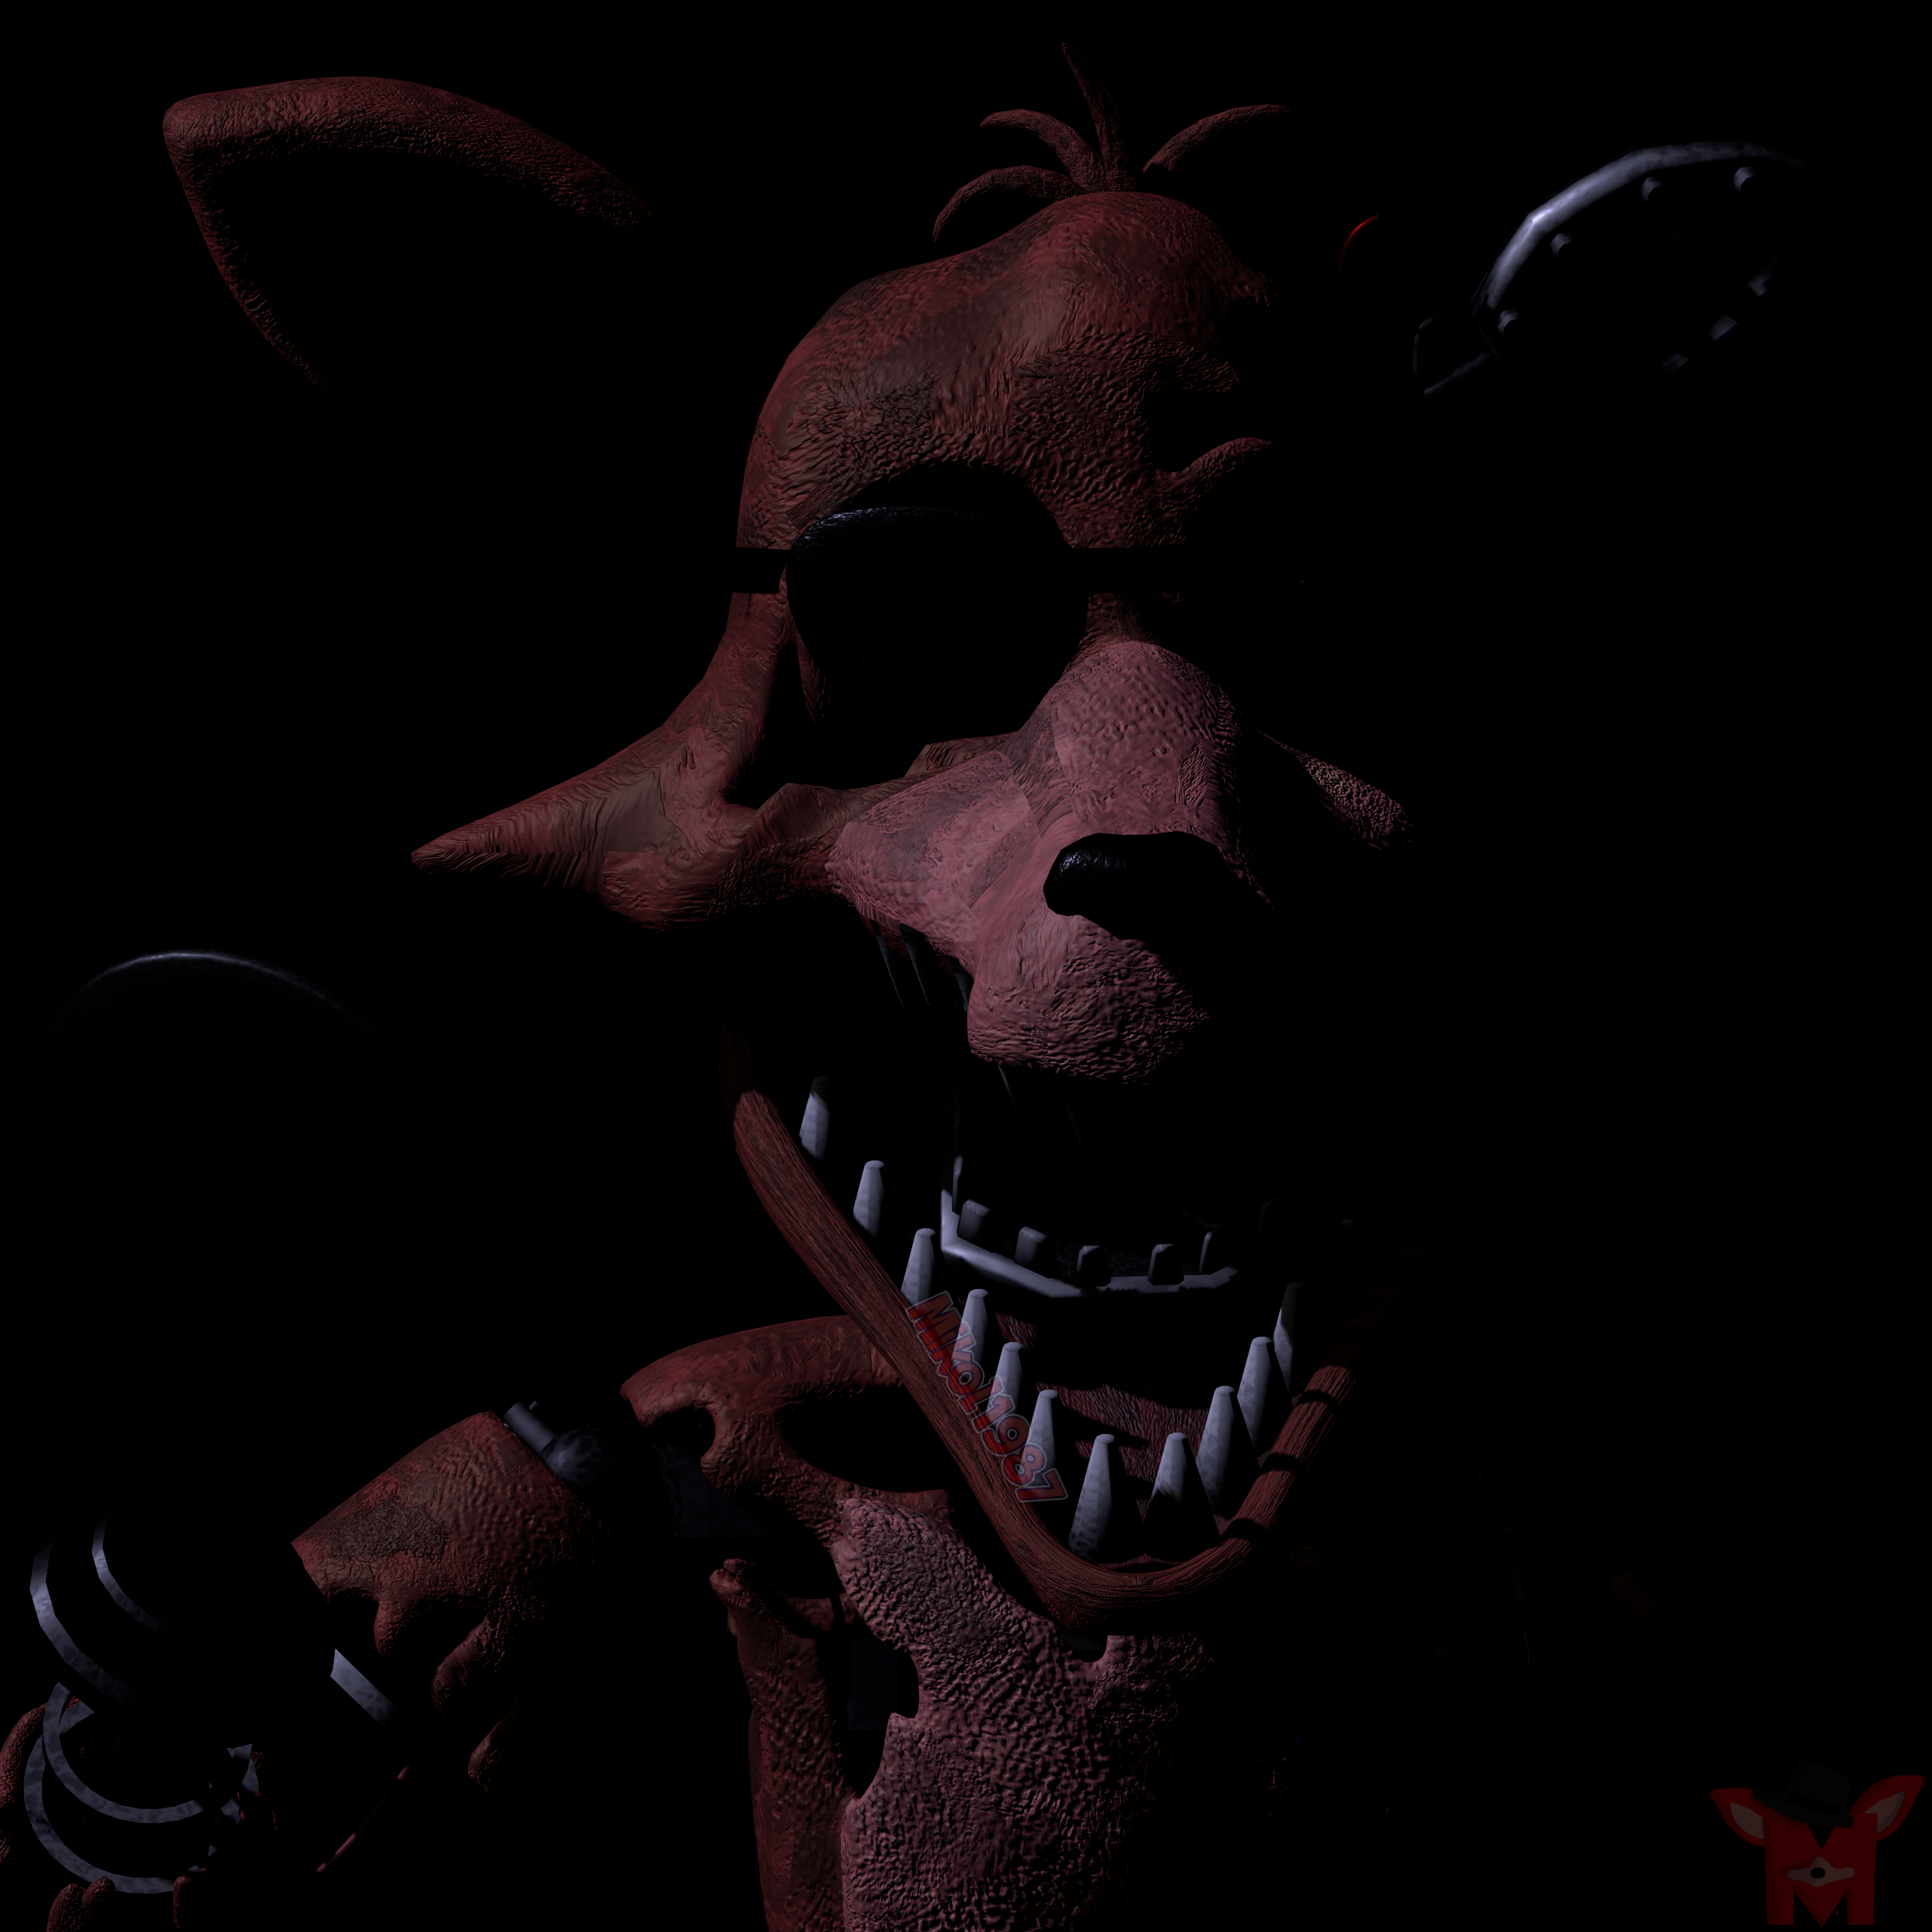 SFM FNAF) Withered Foxy Jumpscare by PsychoticFoxDA on DeviantArt